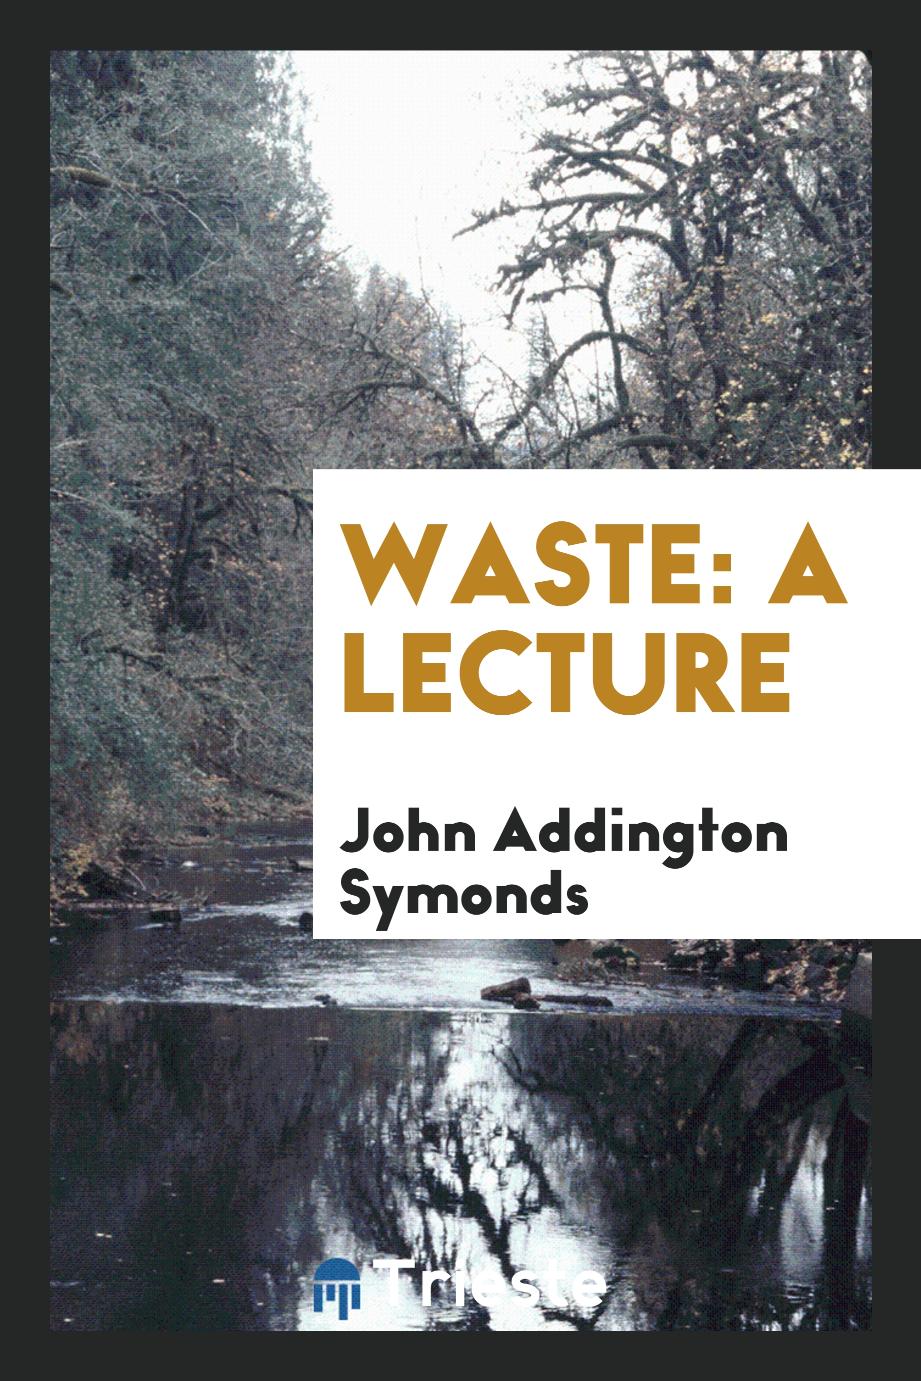 Waste: A Lecture